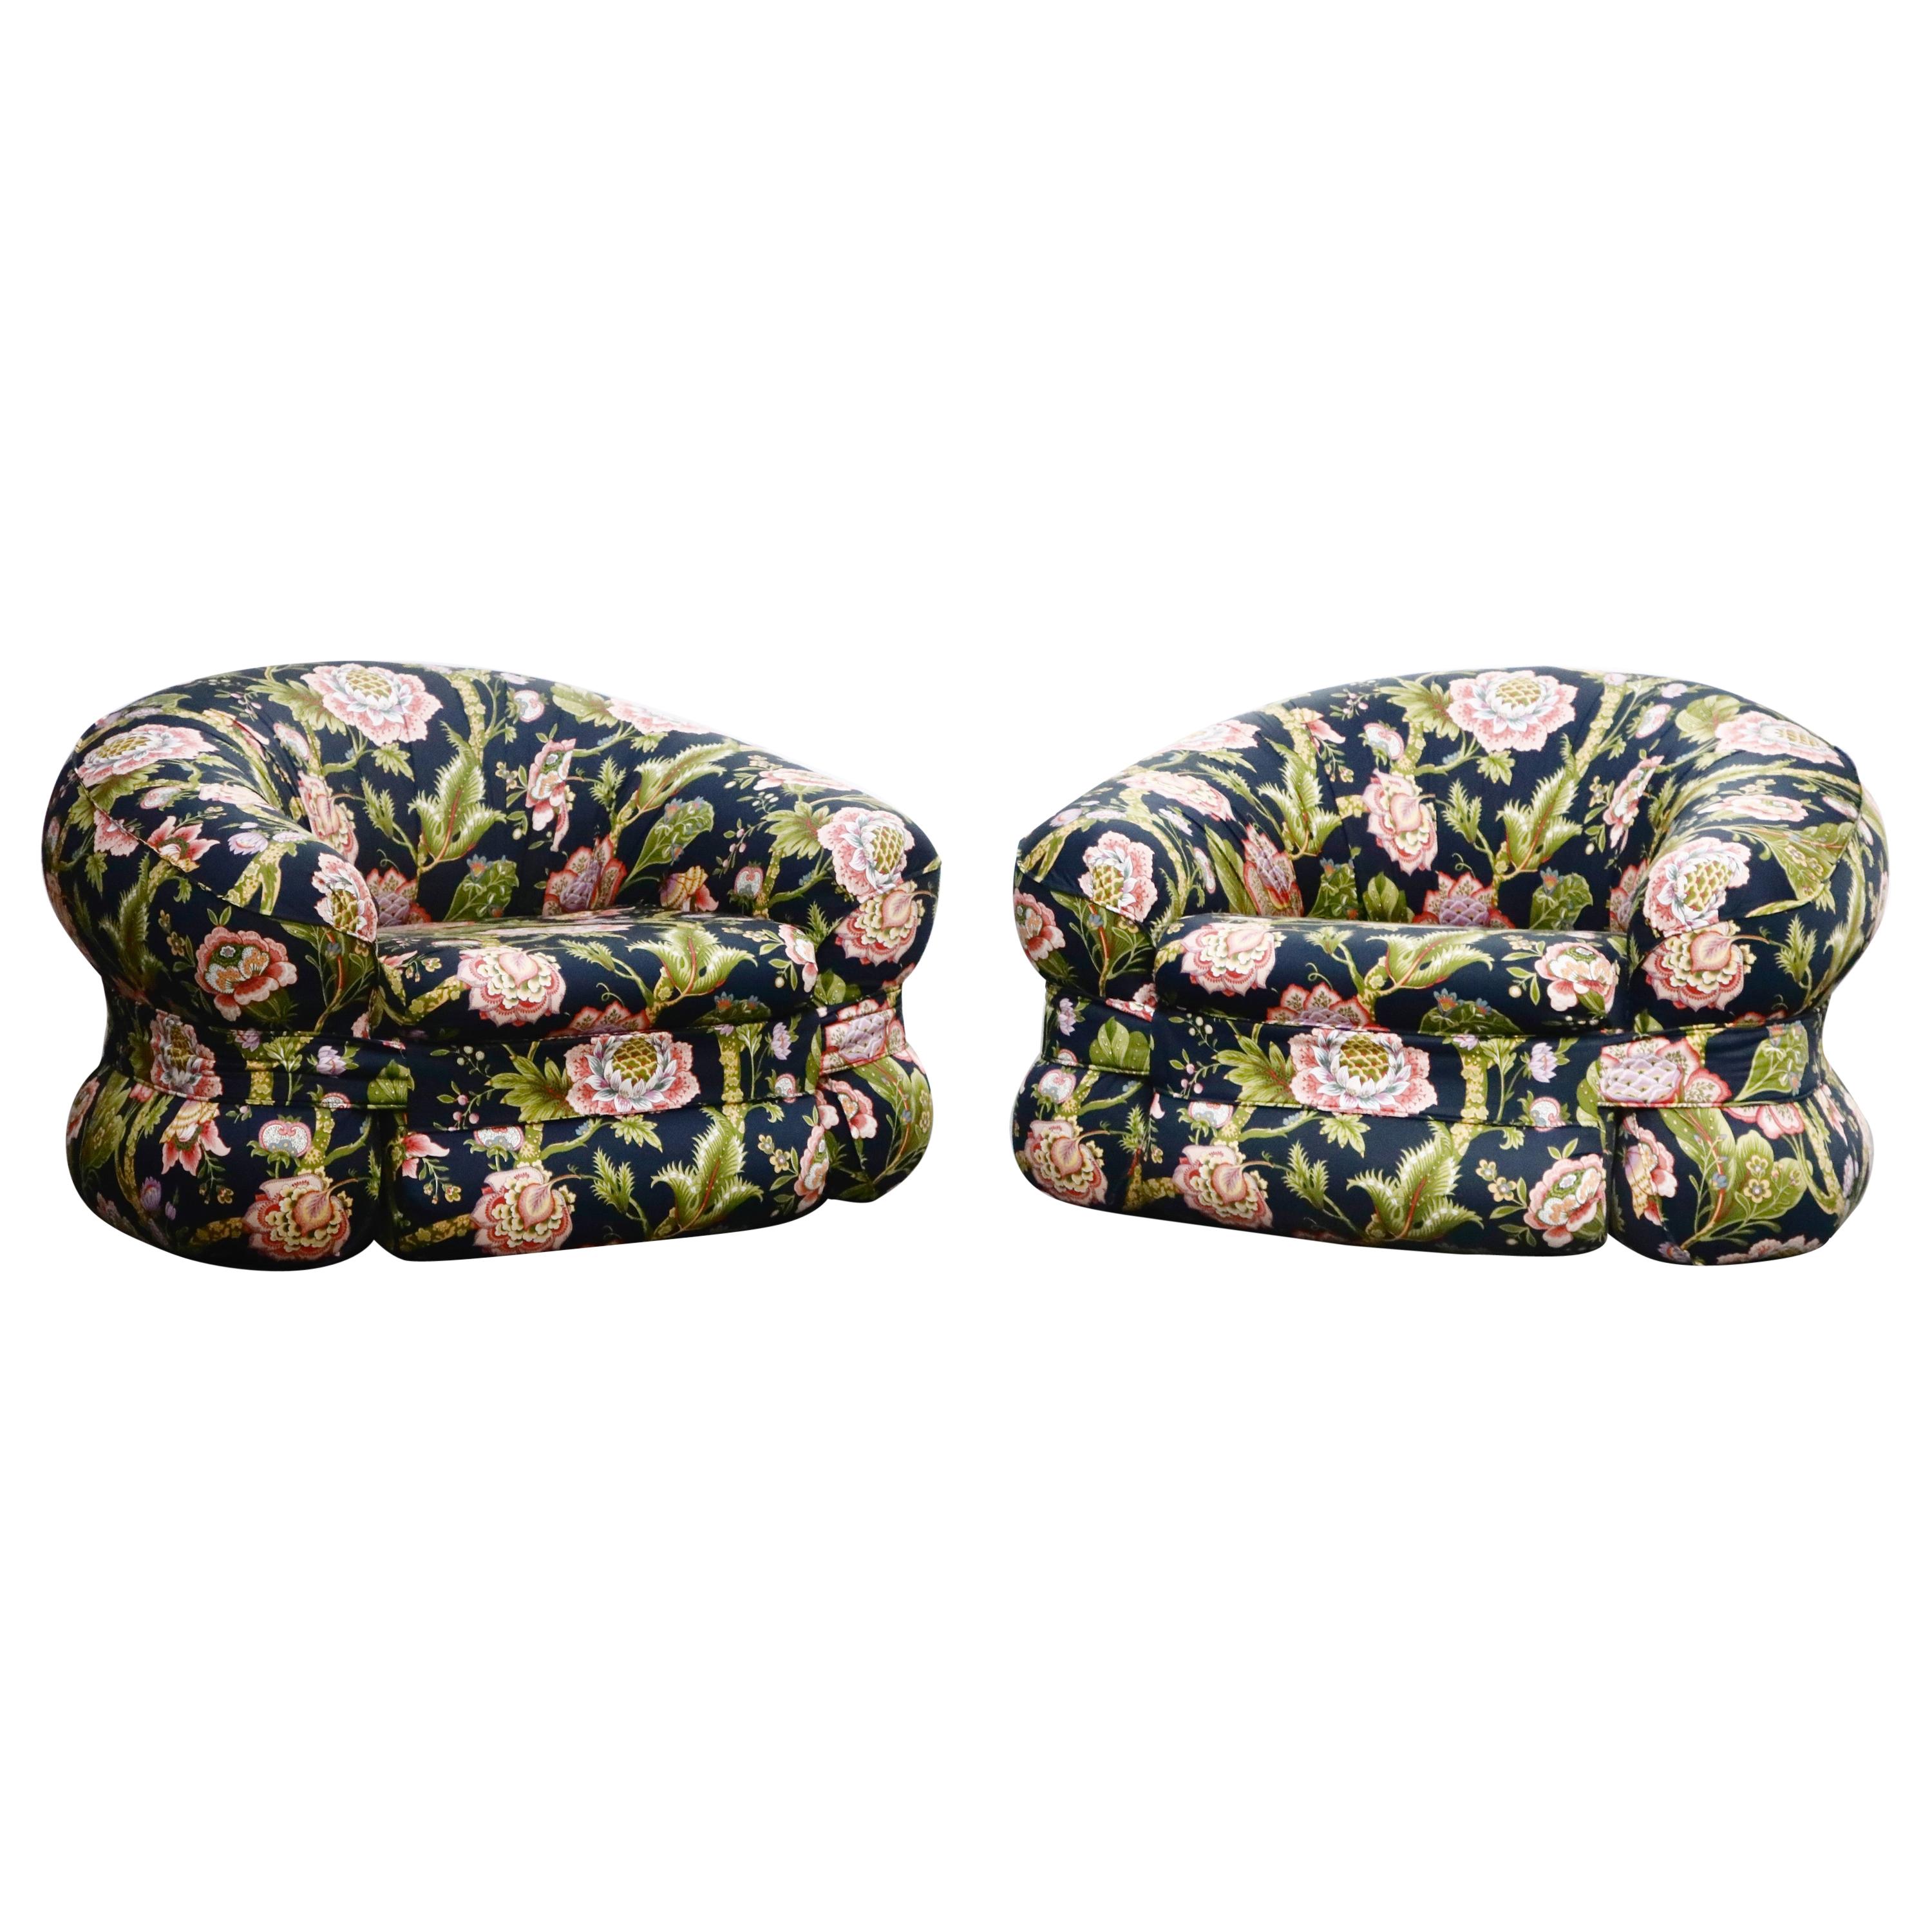 Pair of Mario Bellini Styled Floral Chintz Fabric Lounge Chairs